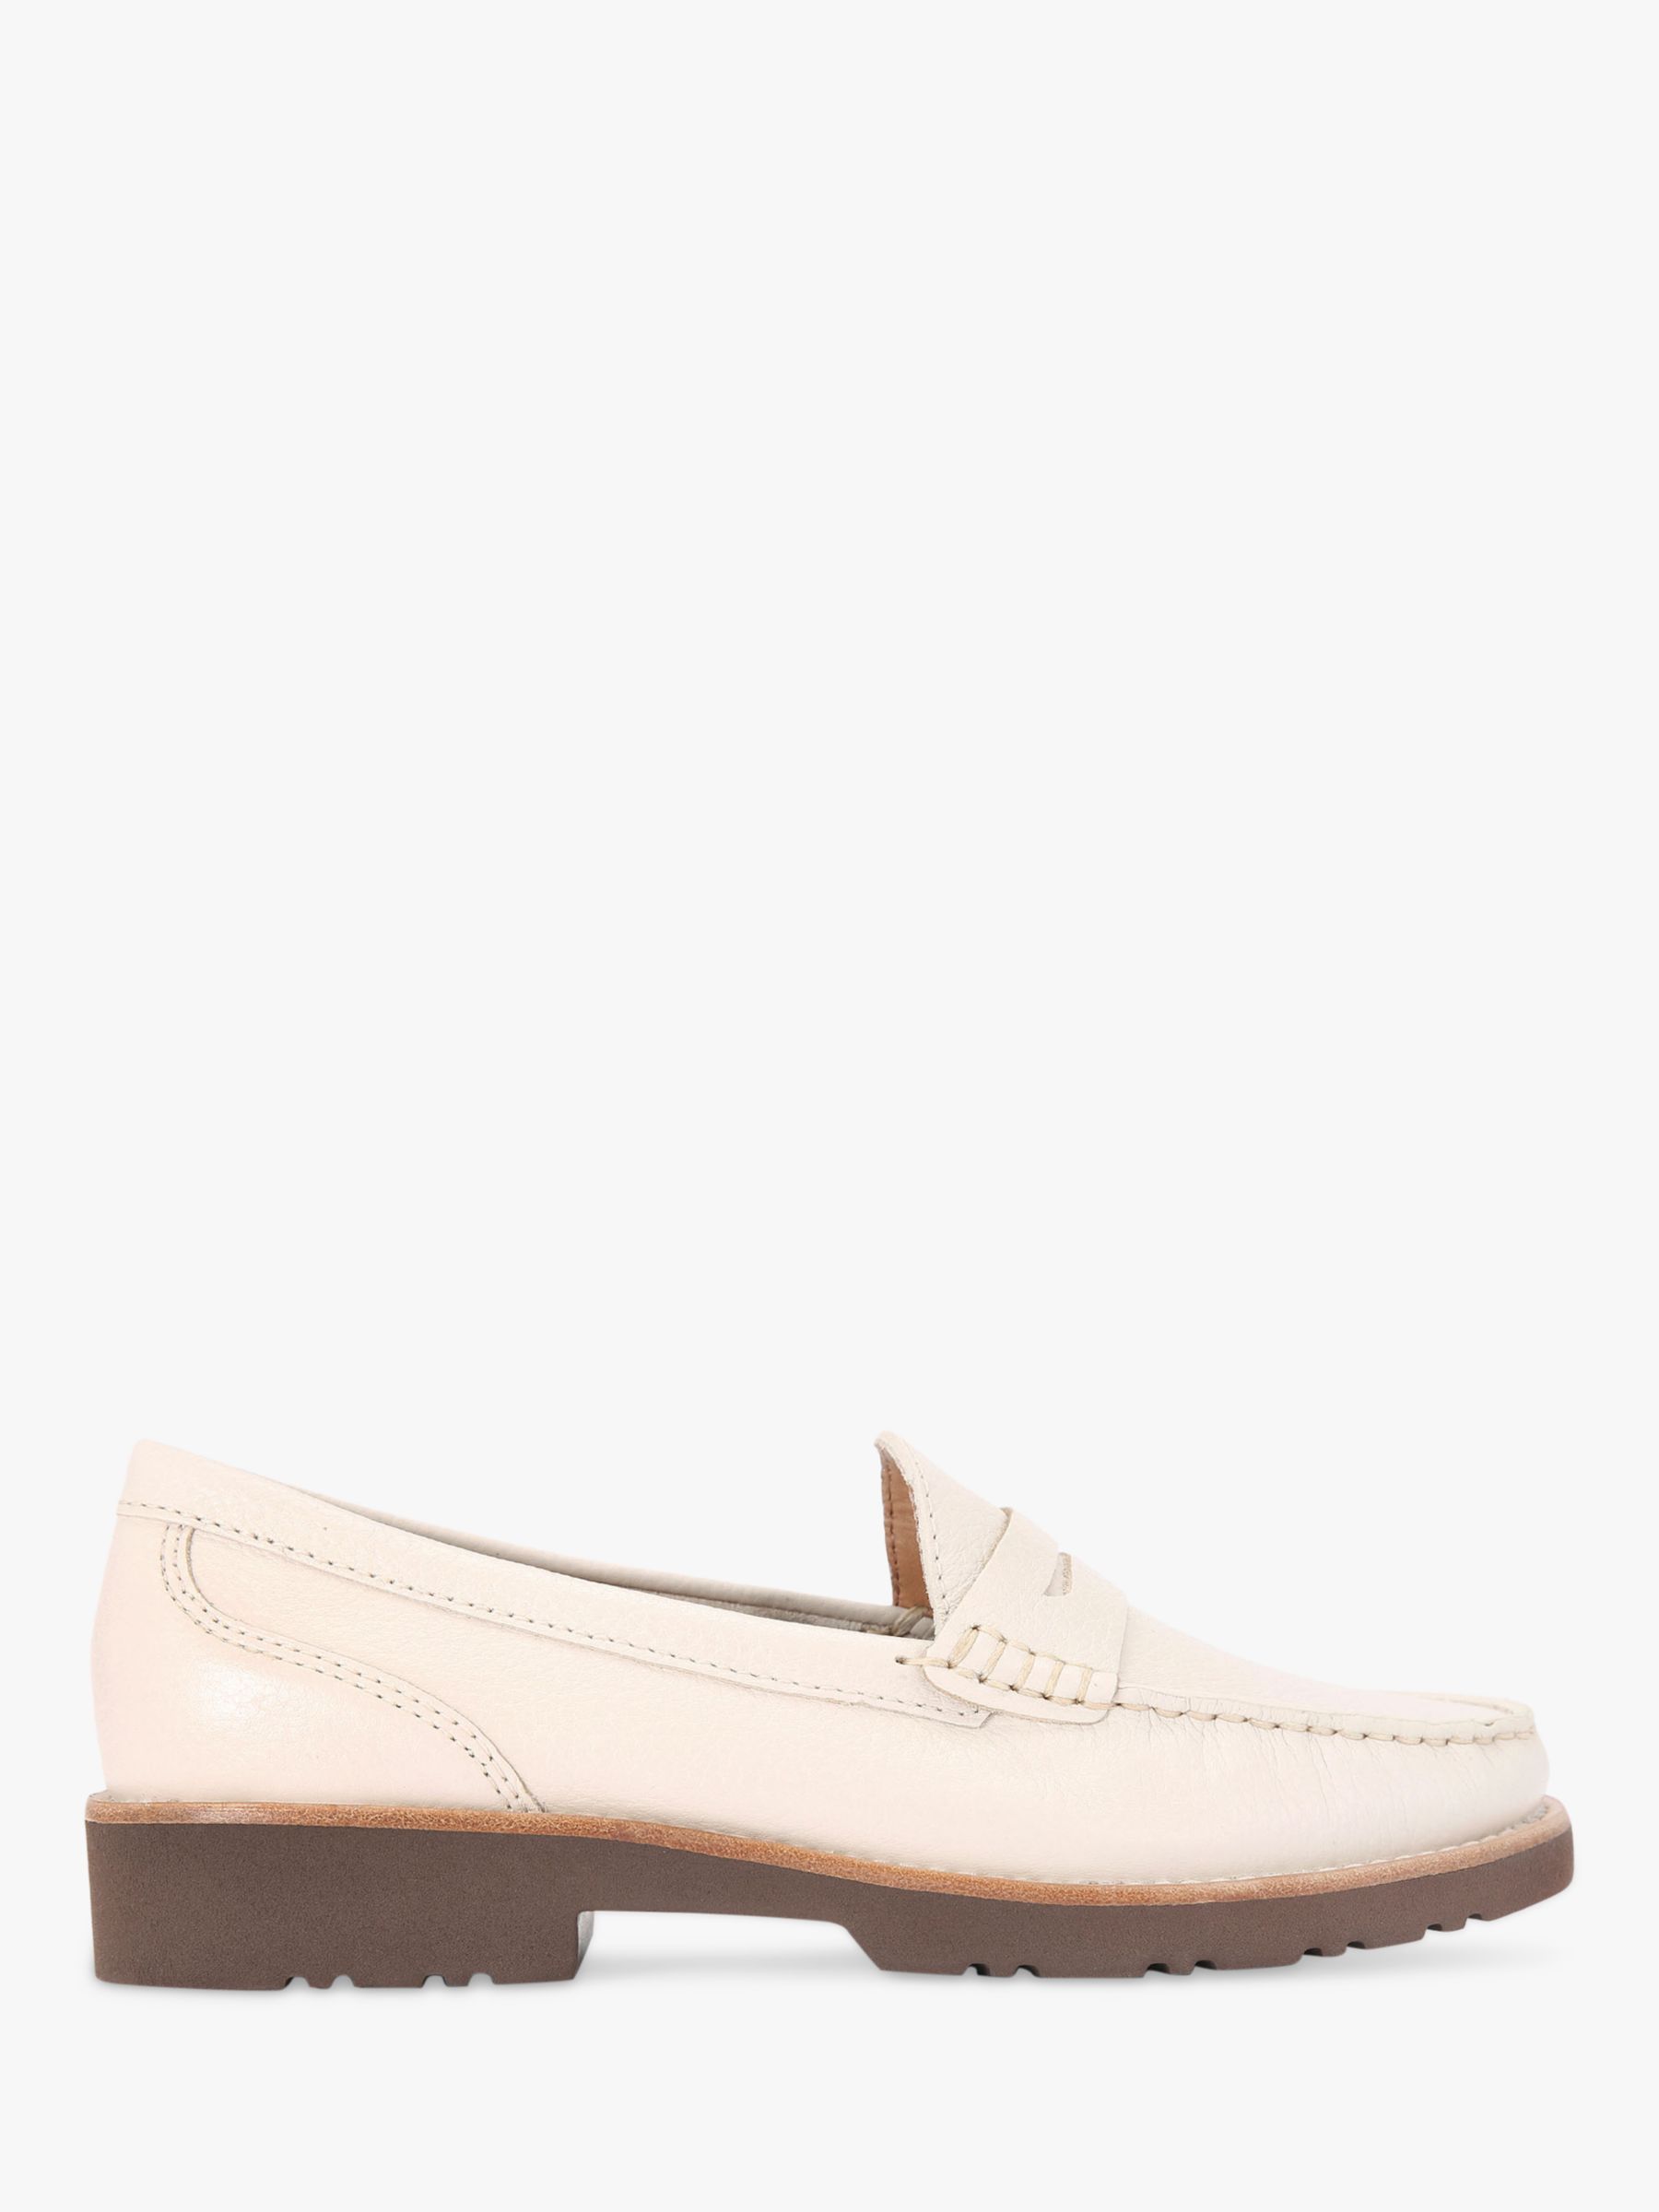 KG Kurt Geiger Melody Leather Loafers, Natural Putty at John Lewis ...